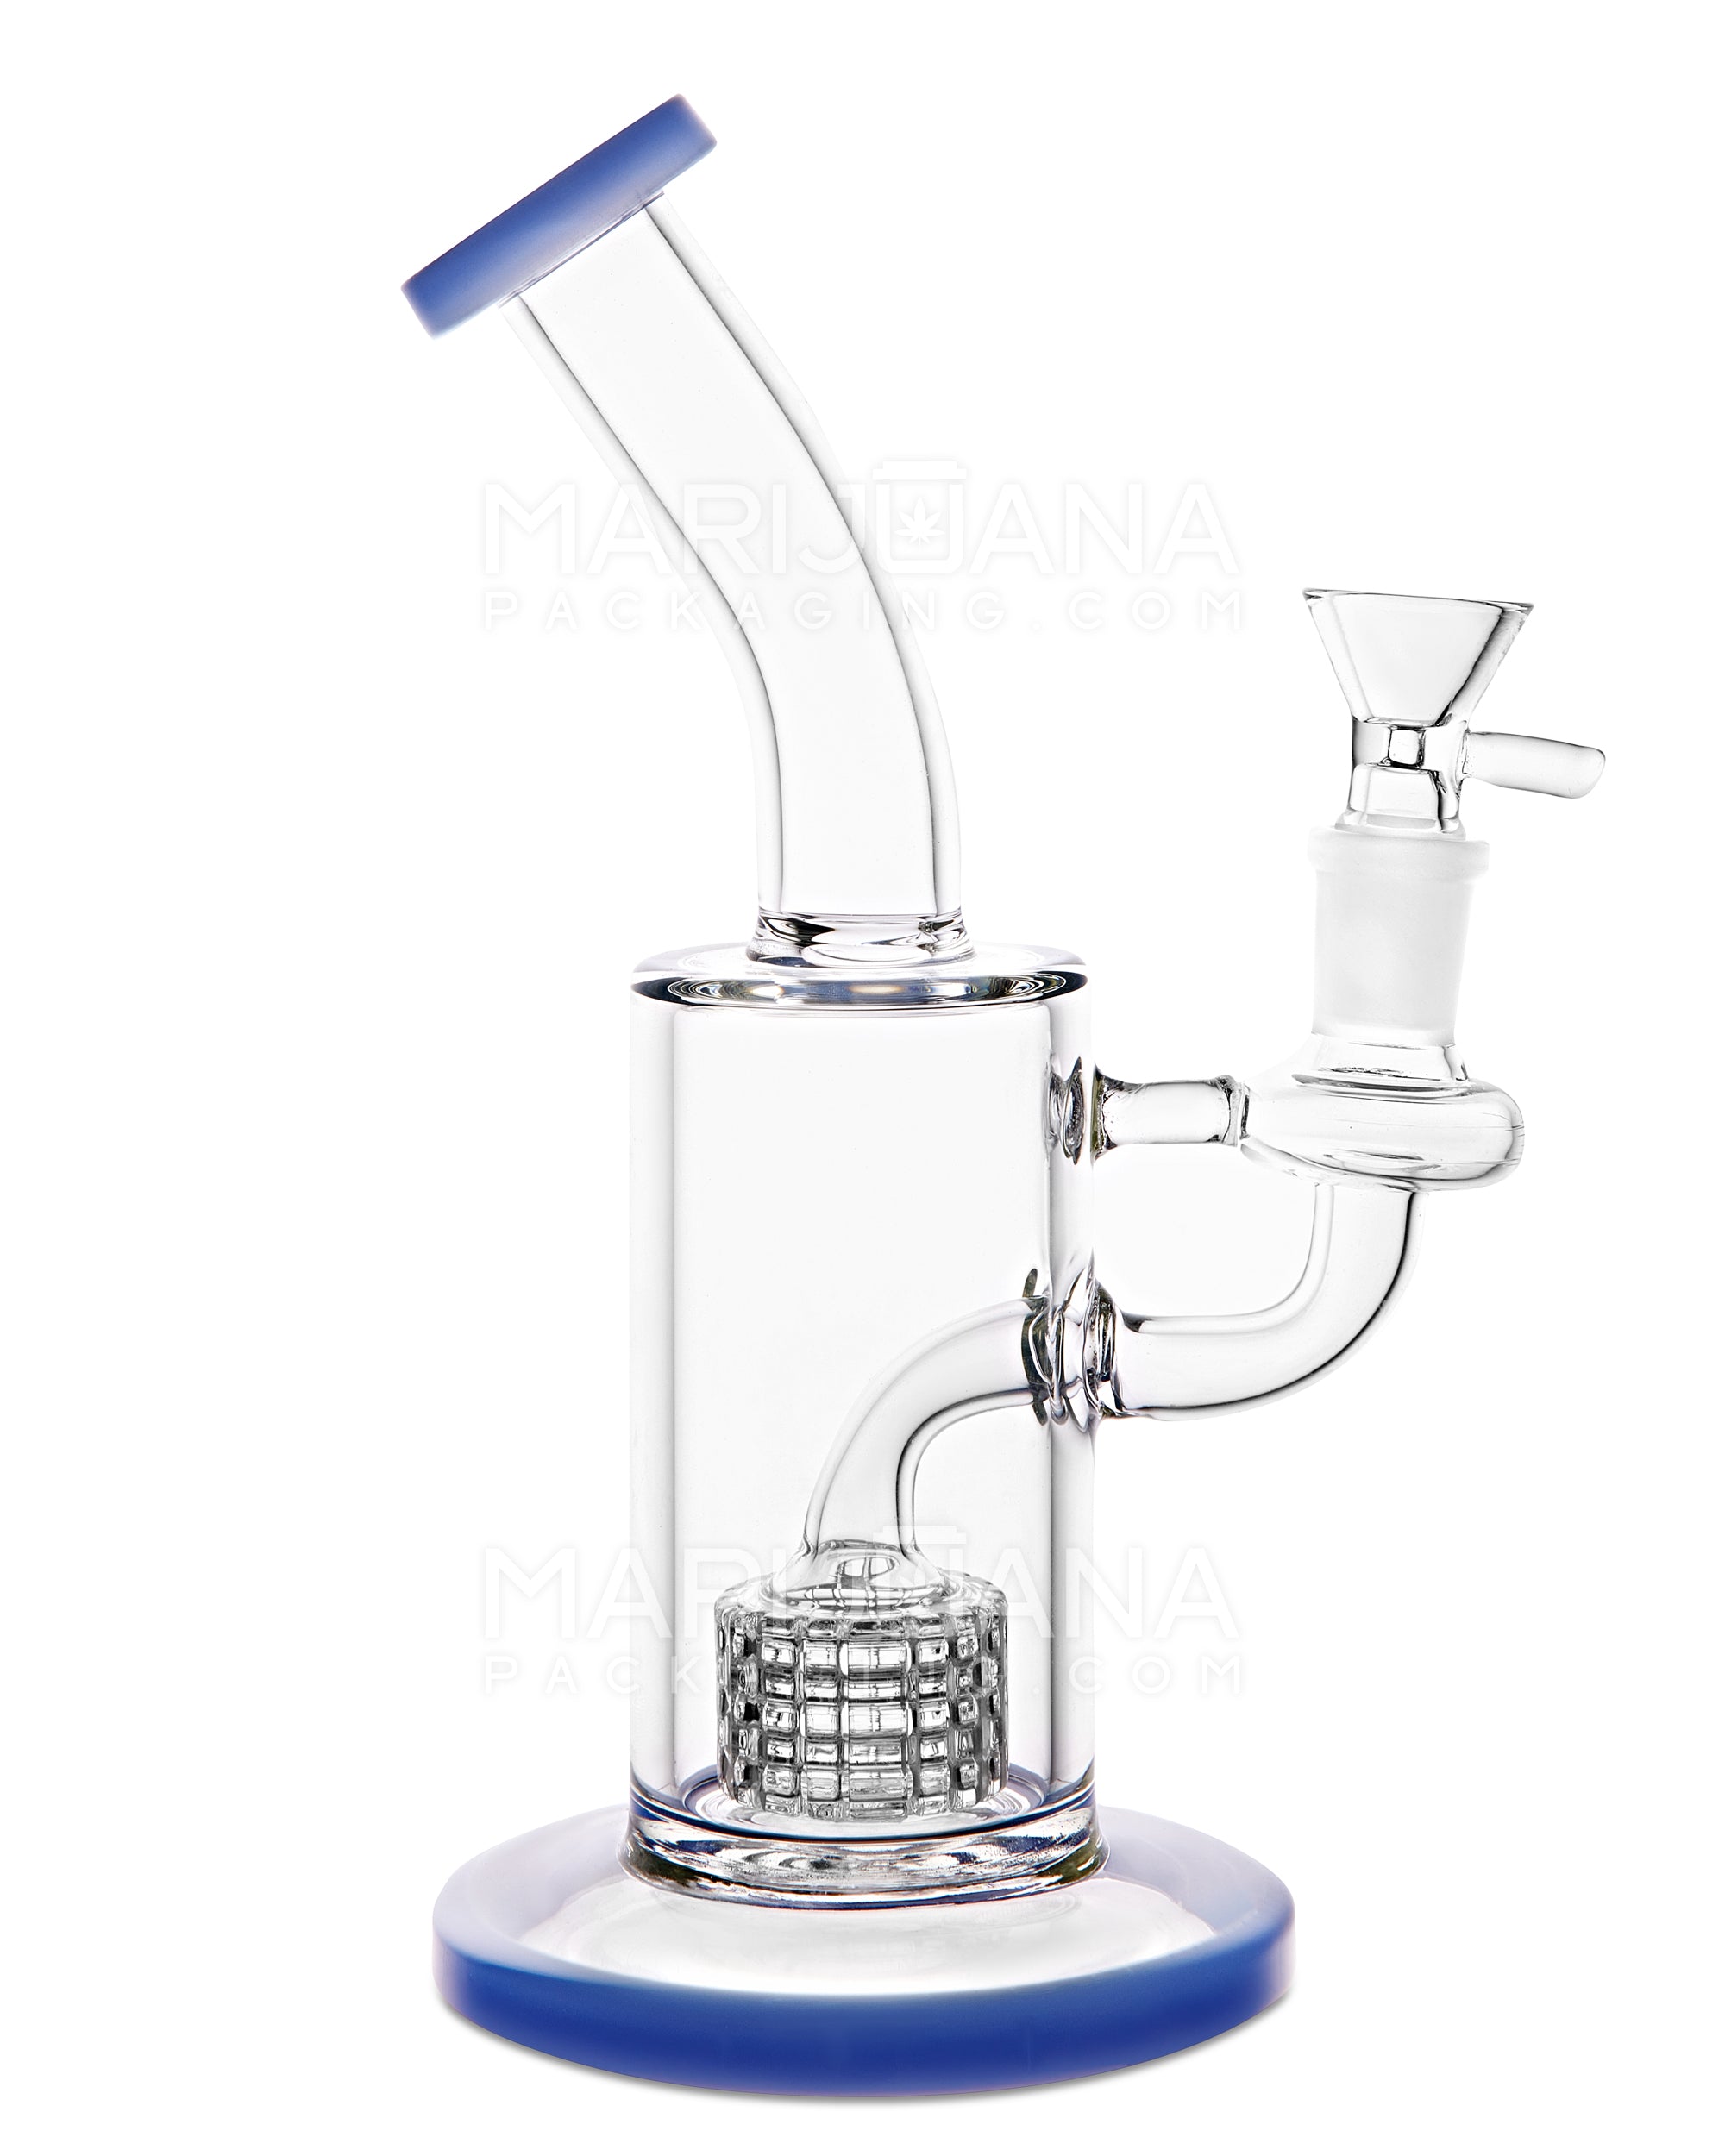 Bent Neck Matrix Perc Glass Water Pipe w/ Thick Base | 8.5in Tall - 14mm Bowl - Blue - 1